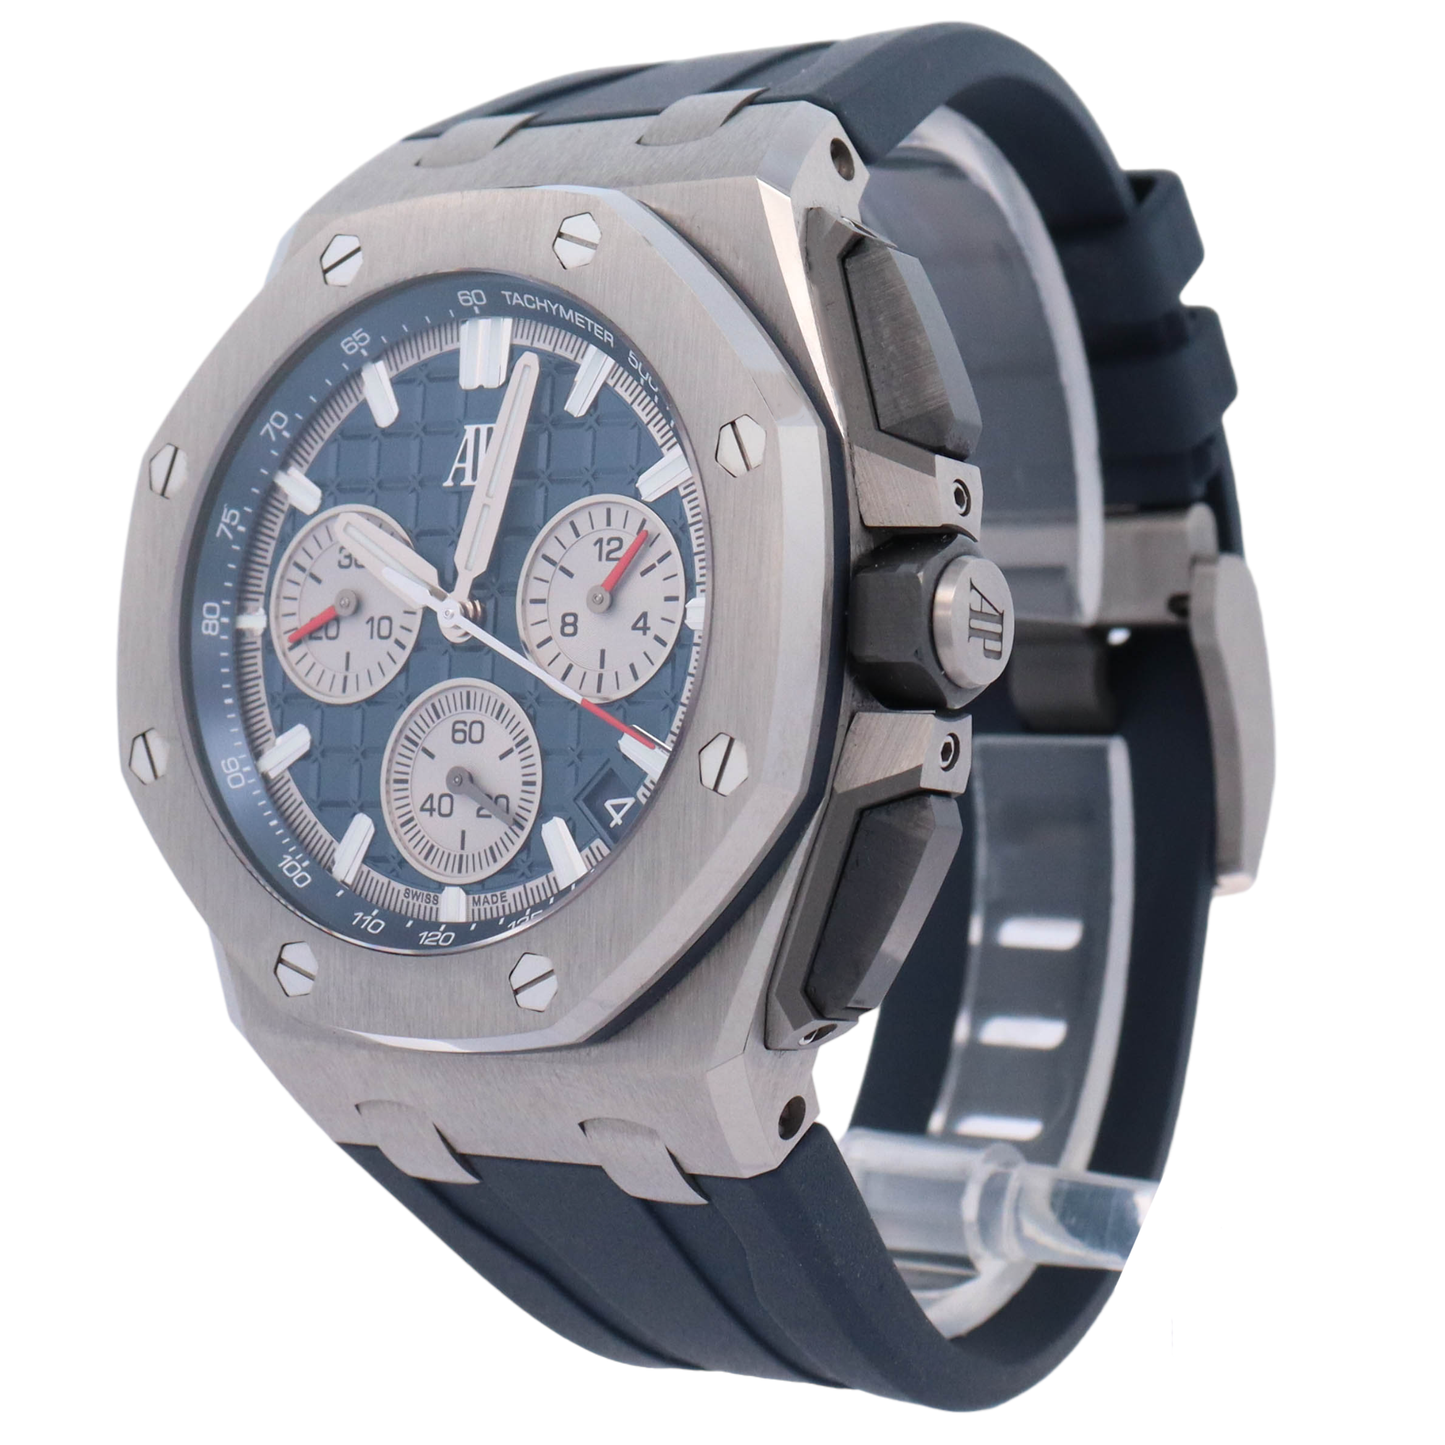 Audemars Piguet Royal Oak Offshore Stainless Steel 43mm Blue Chronograph Dial Watch Reference# 26420TI.OO.A027CA.01